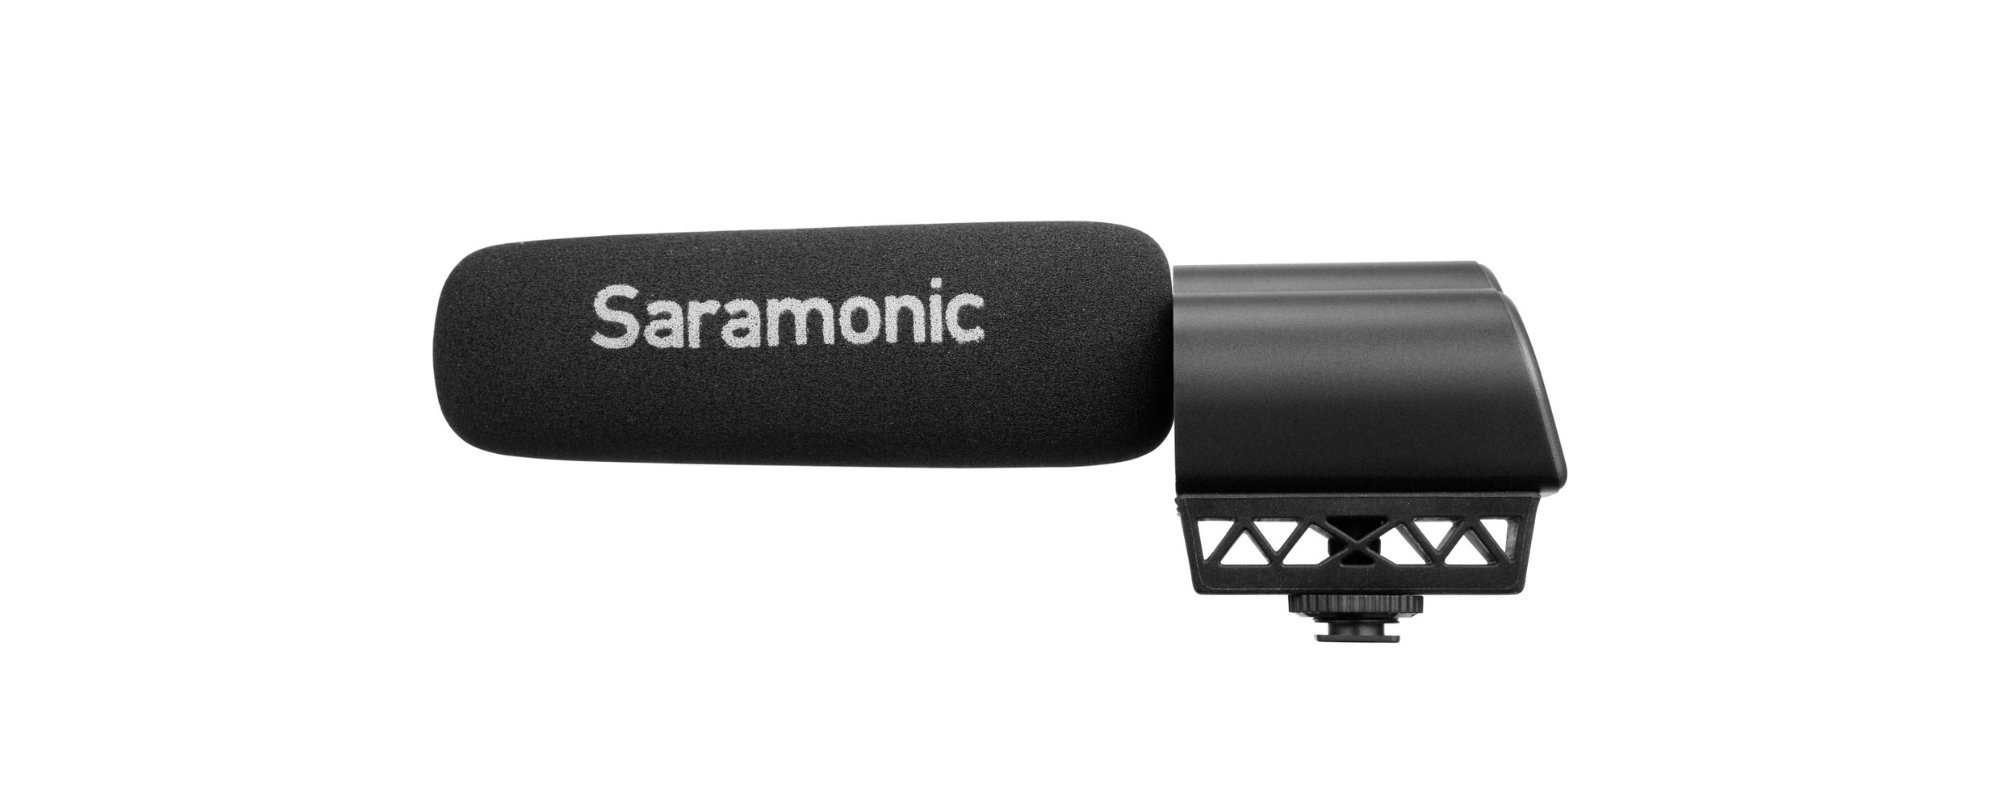 Saramonic Vmic Pro Mark II condenser microphone for cameras and camcorders